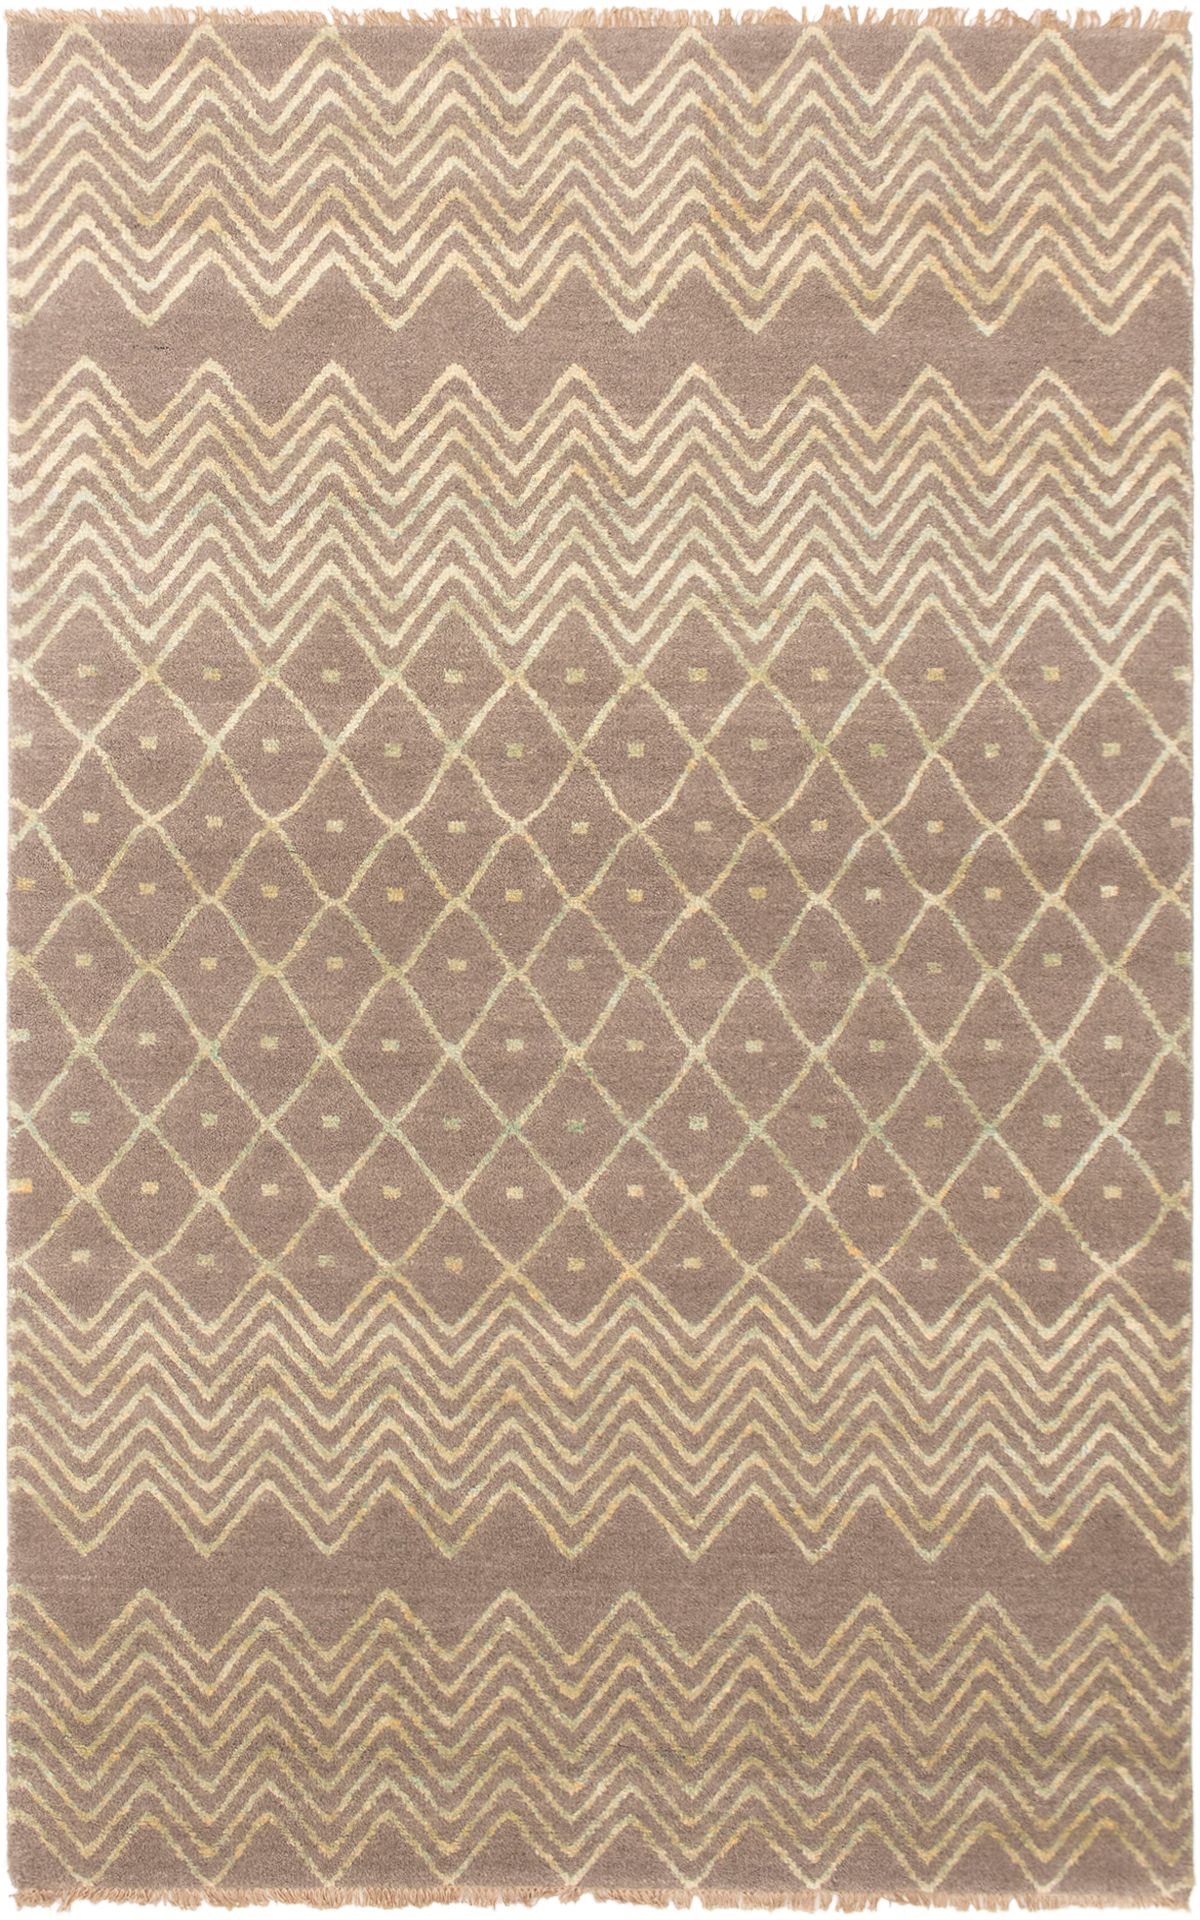 Hand-knotted Eternity Grey  Rug 5'1" x 8'2" Size: 5'1" x 8'2"  